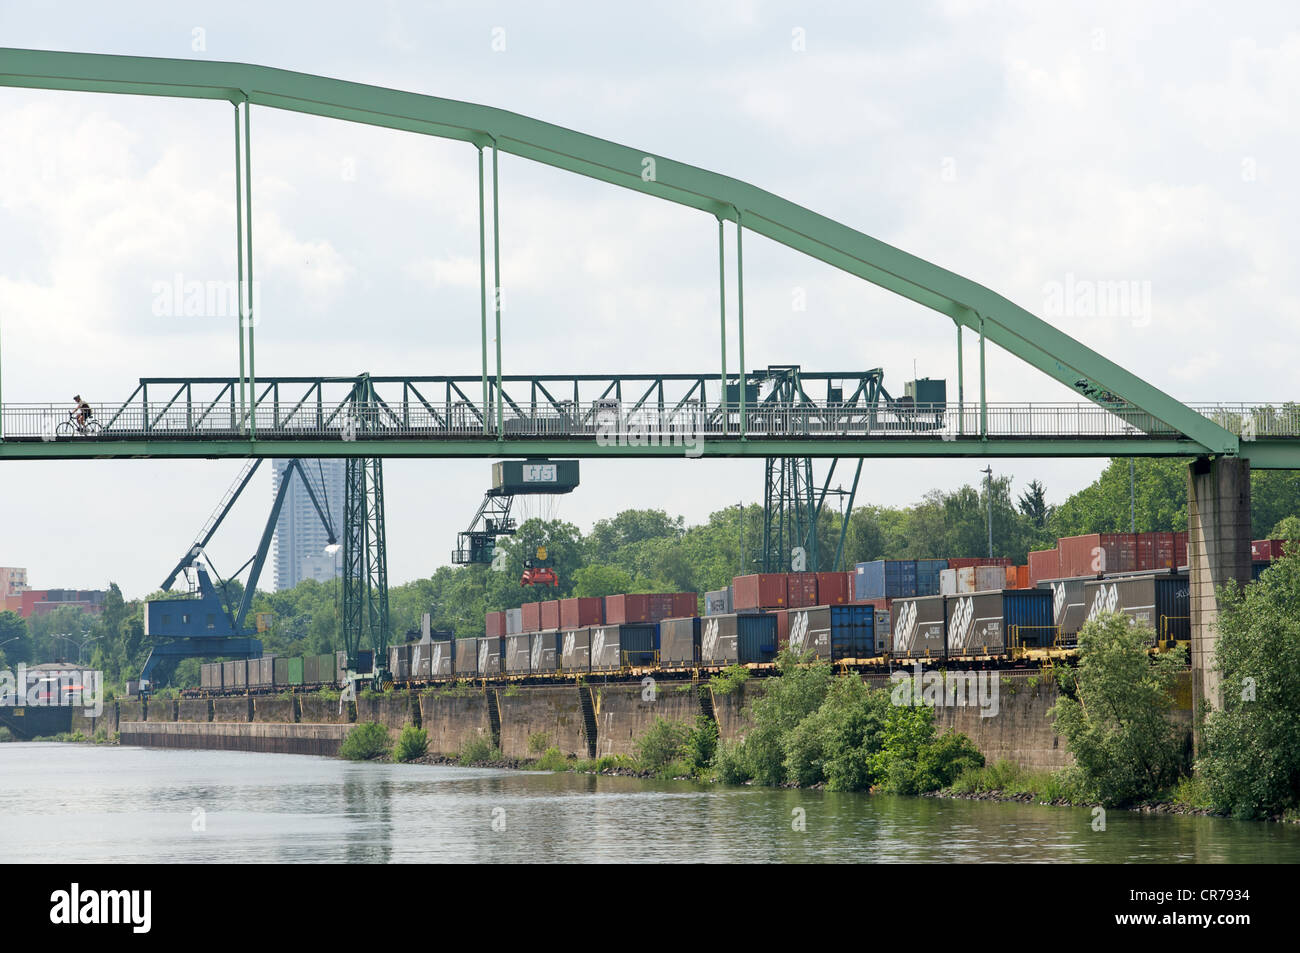 Railway container  freight terminal Niehl, Cologne Germany Stock Photo